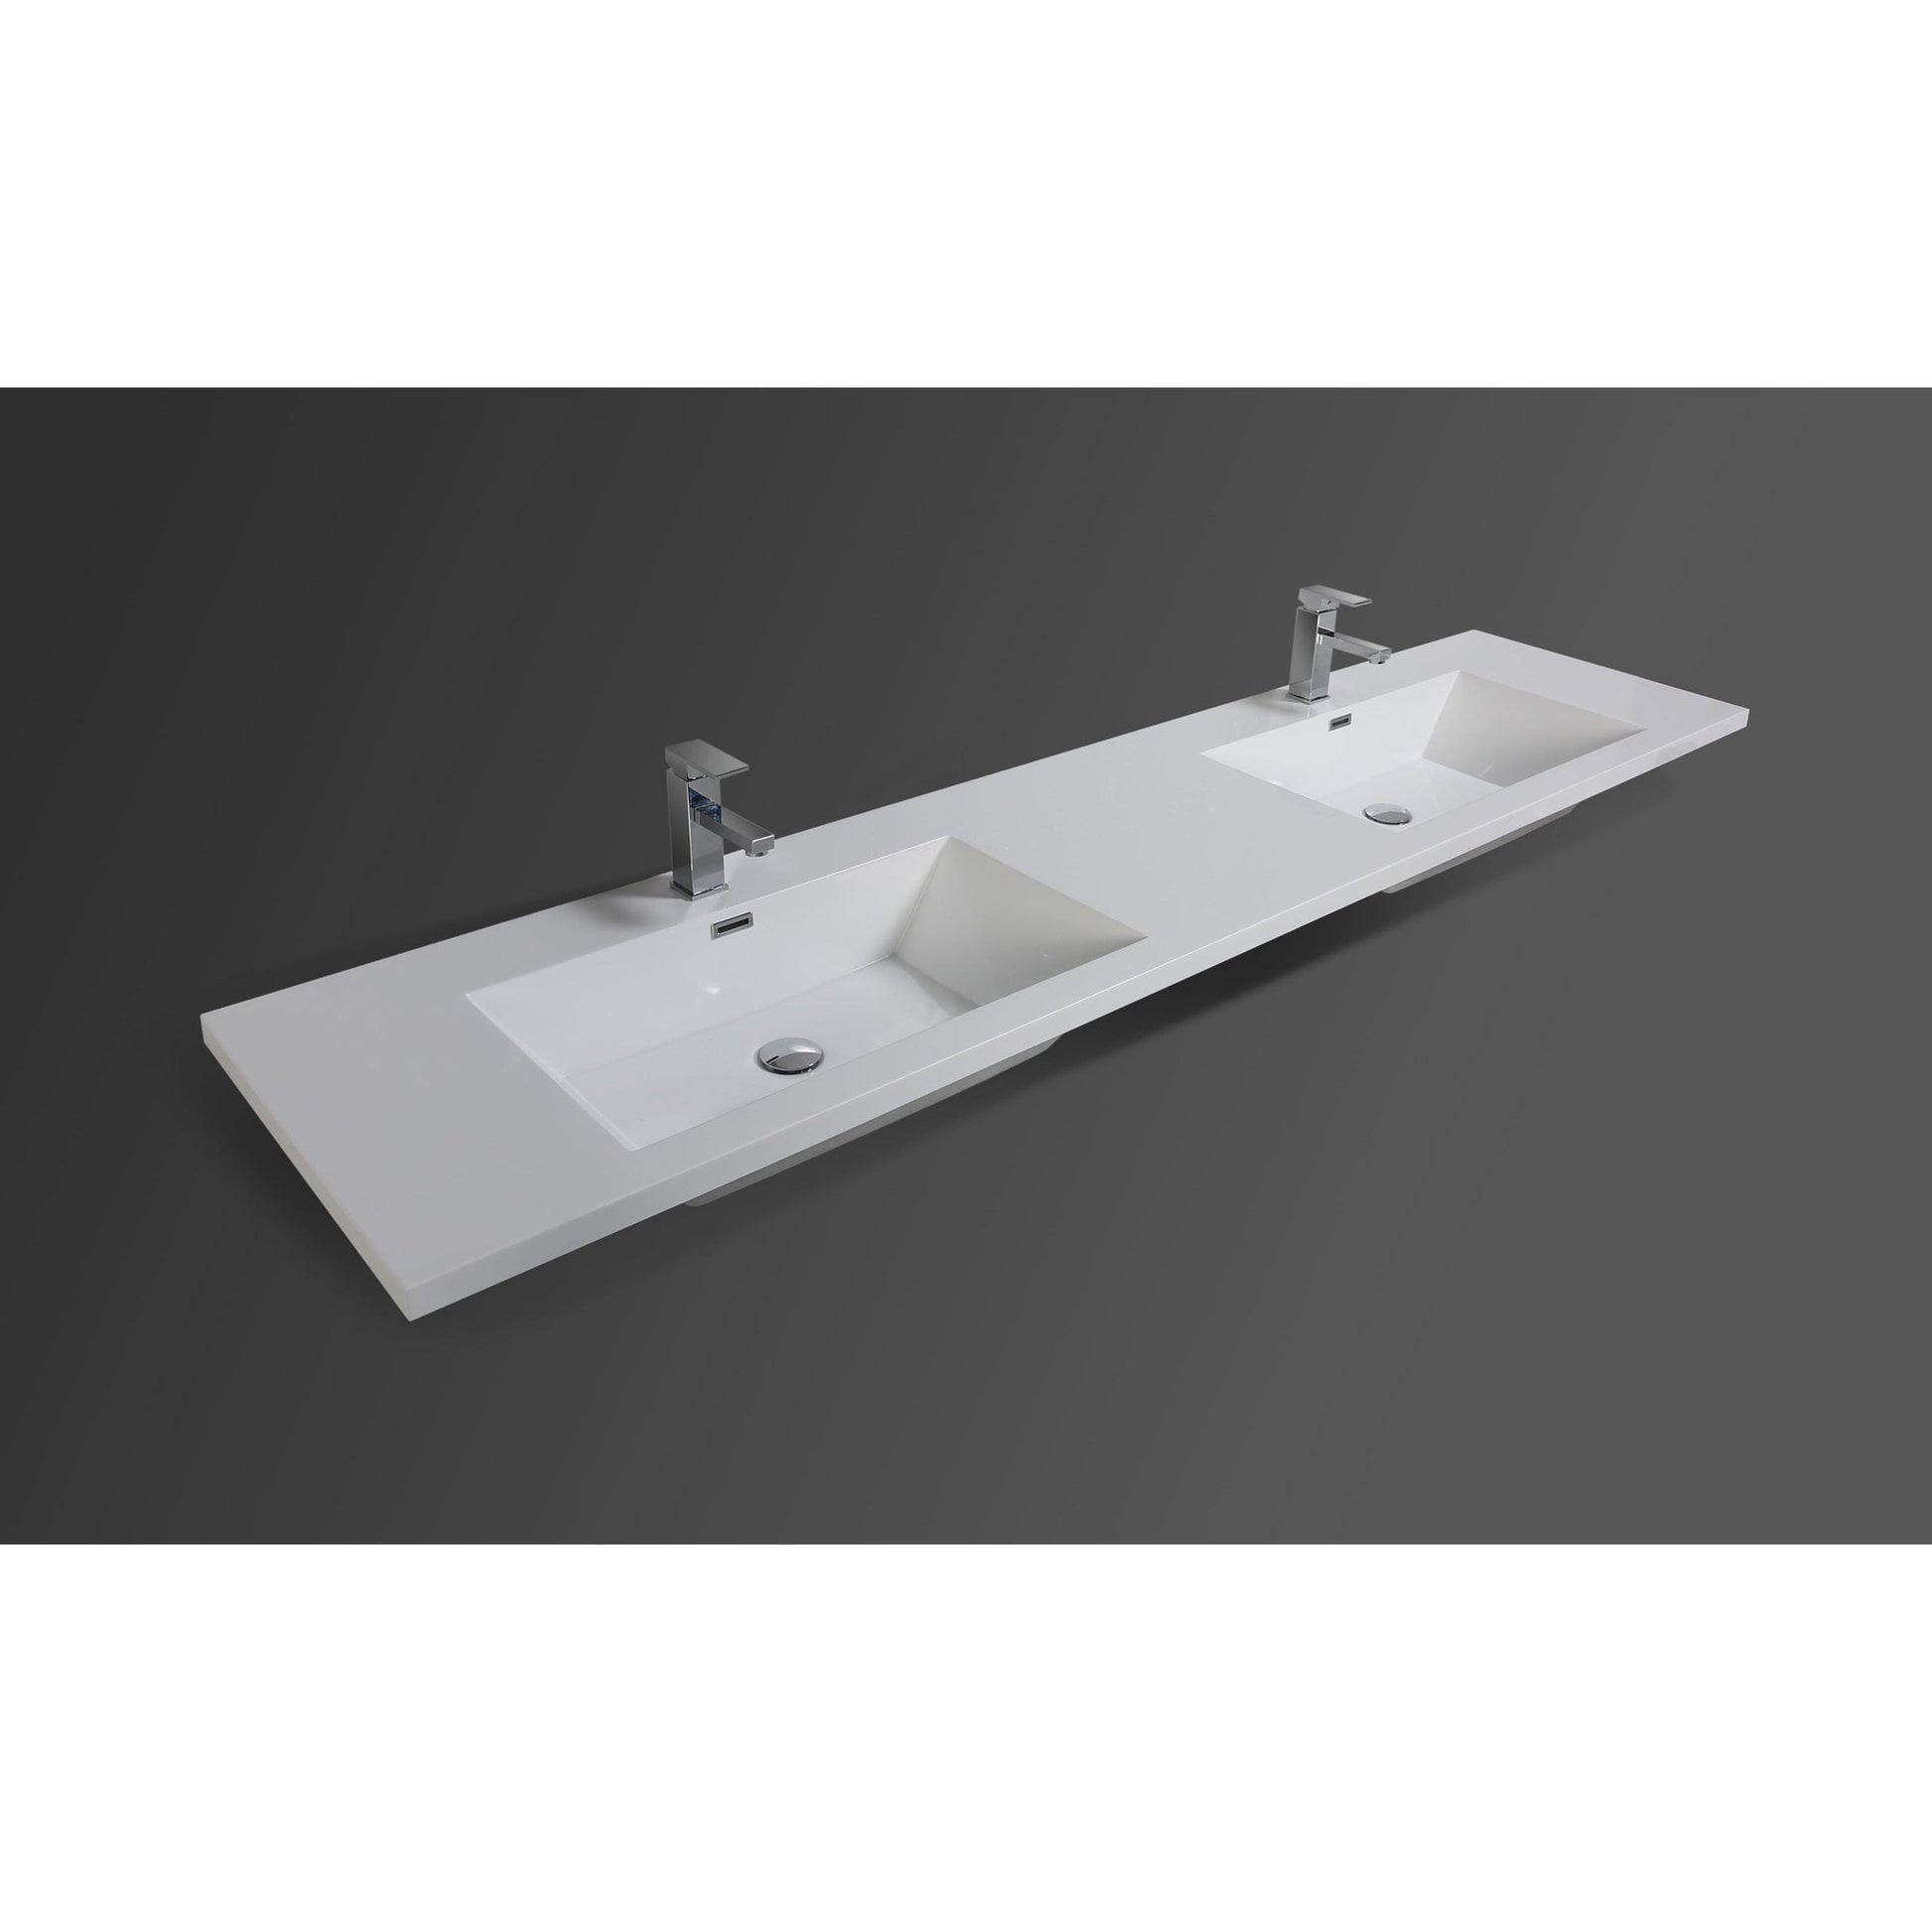 Moreno Bath Dolce 84" High Gloss Ash Gray Freestanding Vanity With Double Reinforced White Acrylic Sinks